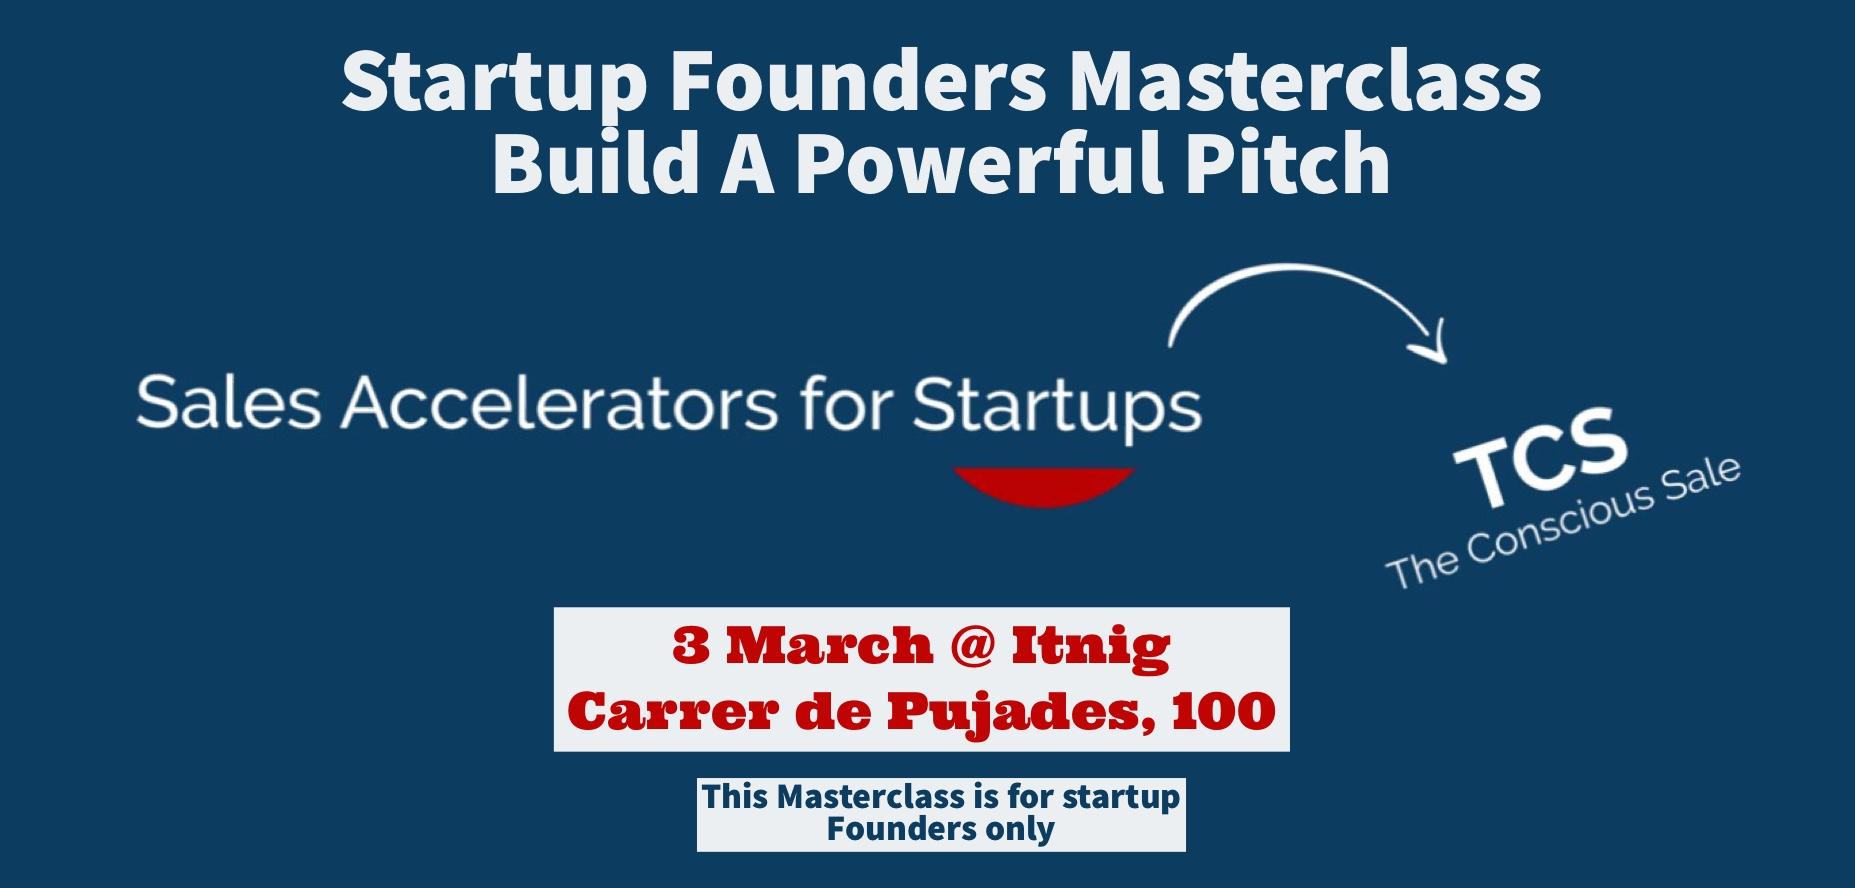 Startup Founders Masterclass - Build A Powerful Pitch